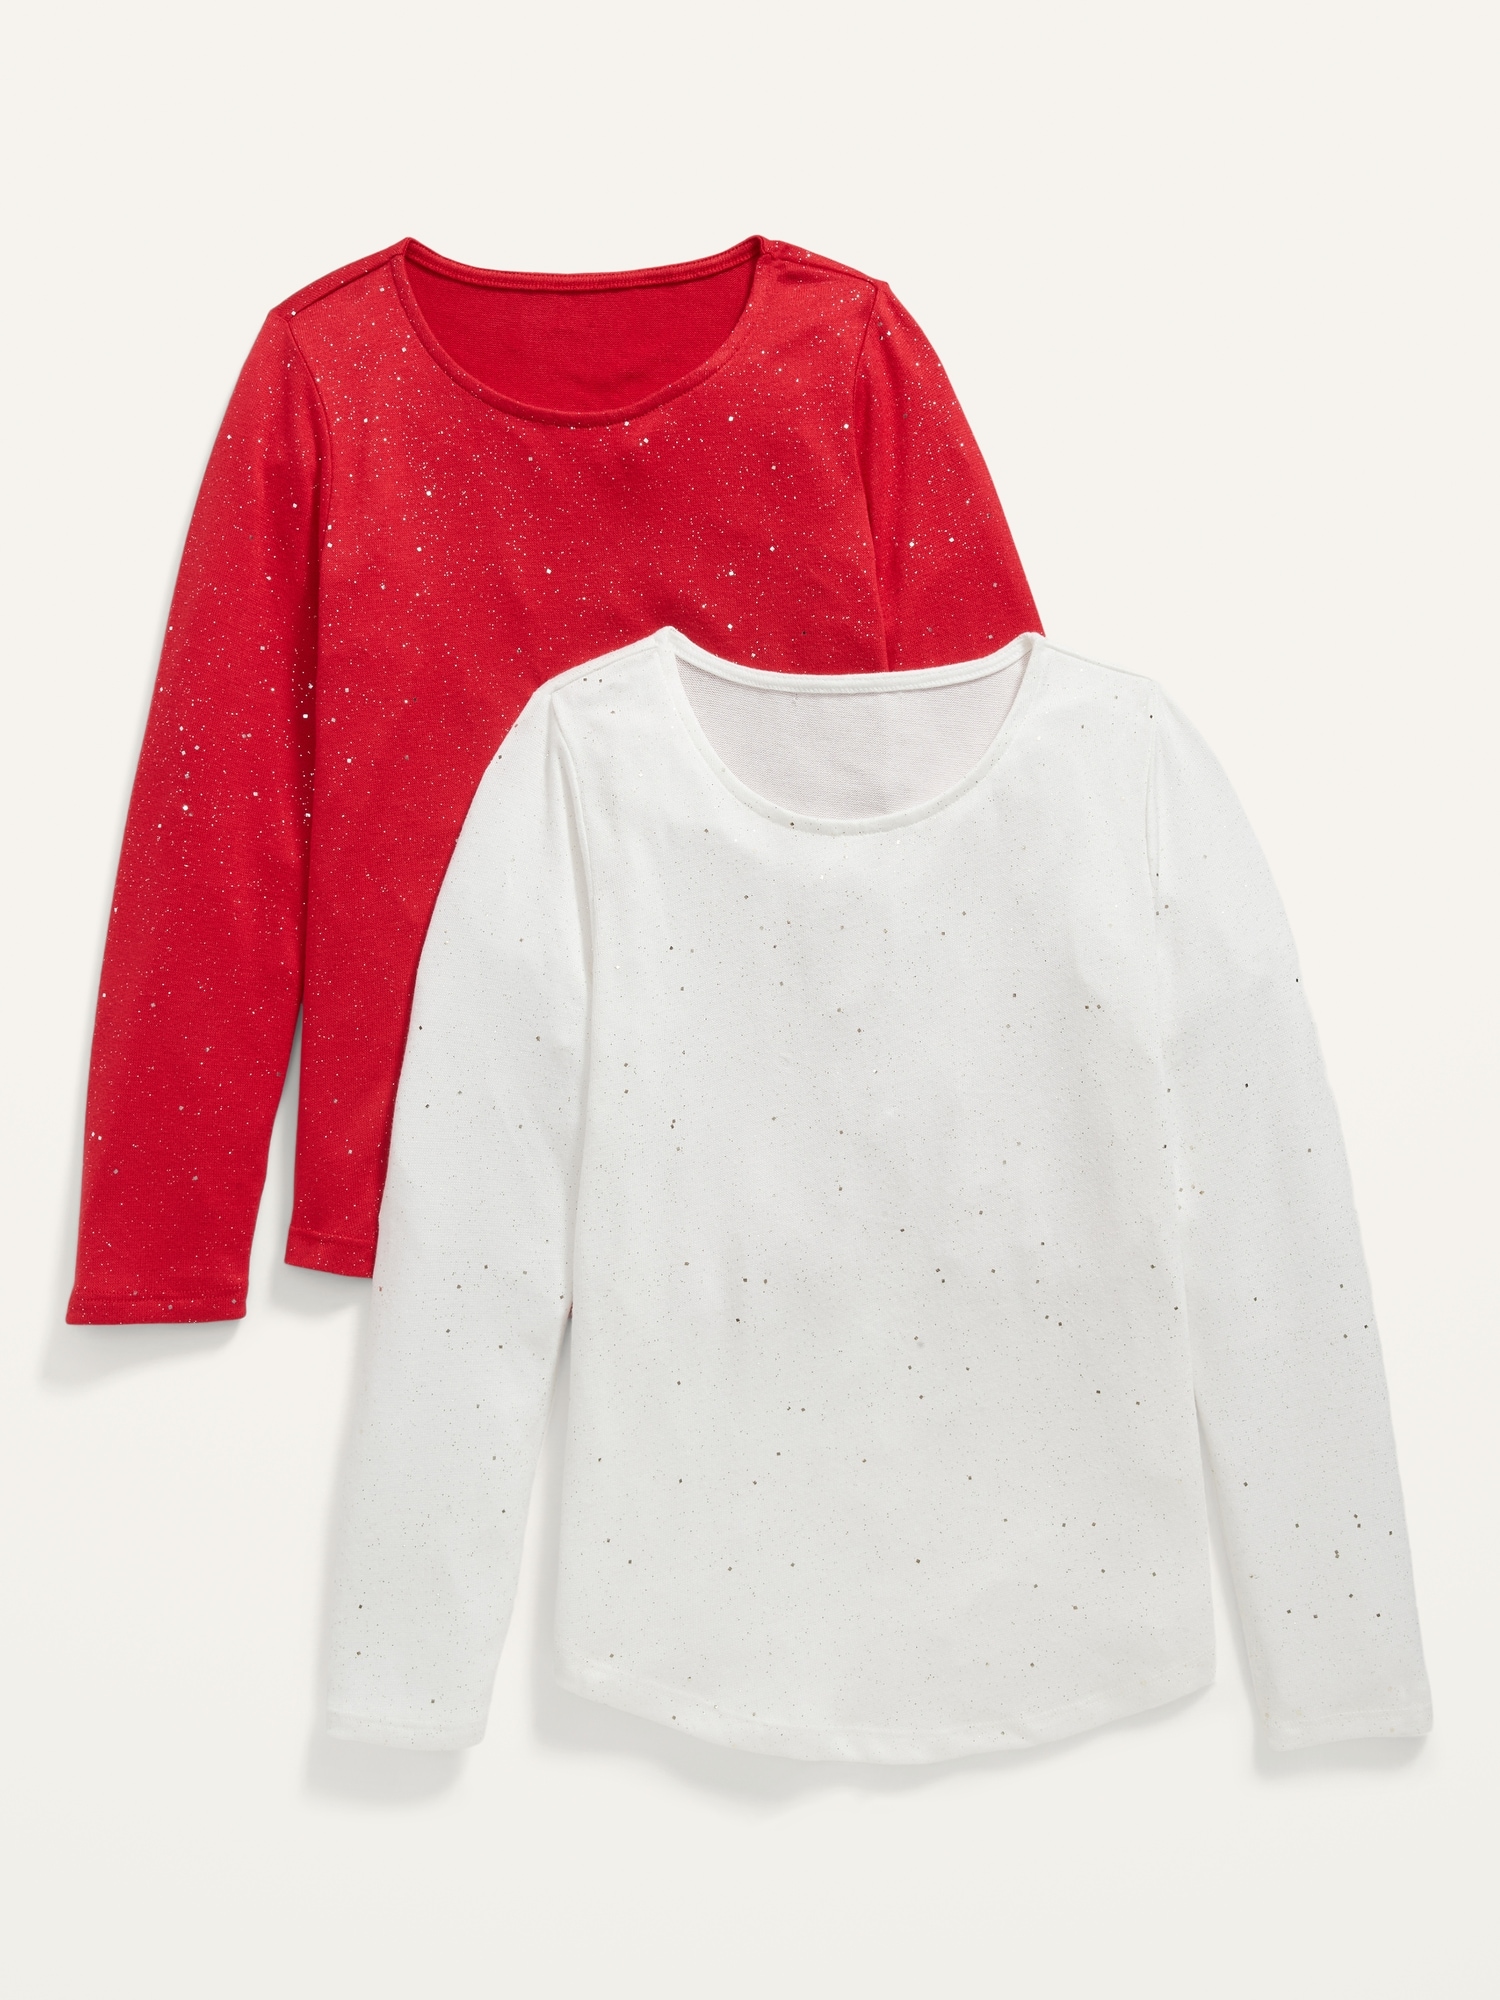 Old Navy Cozy-Knit Long-Sleeve T-Shirt 2-Pack for Girls red. 1